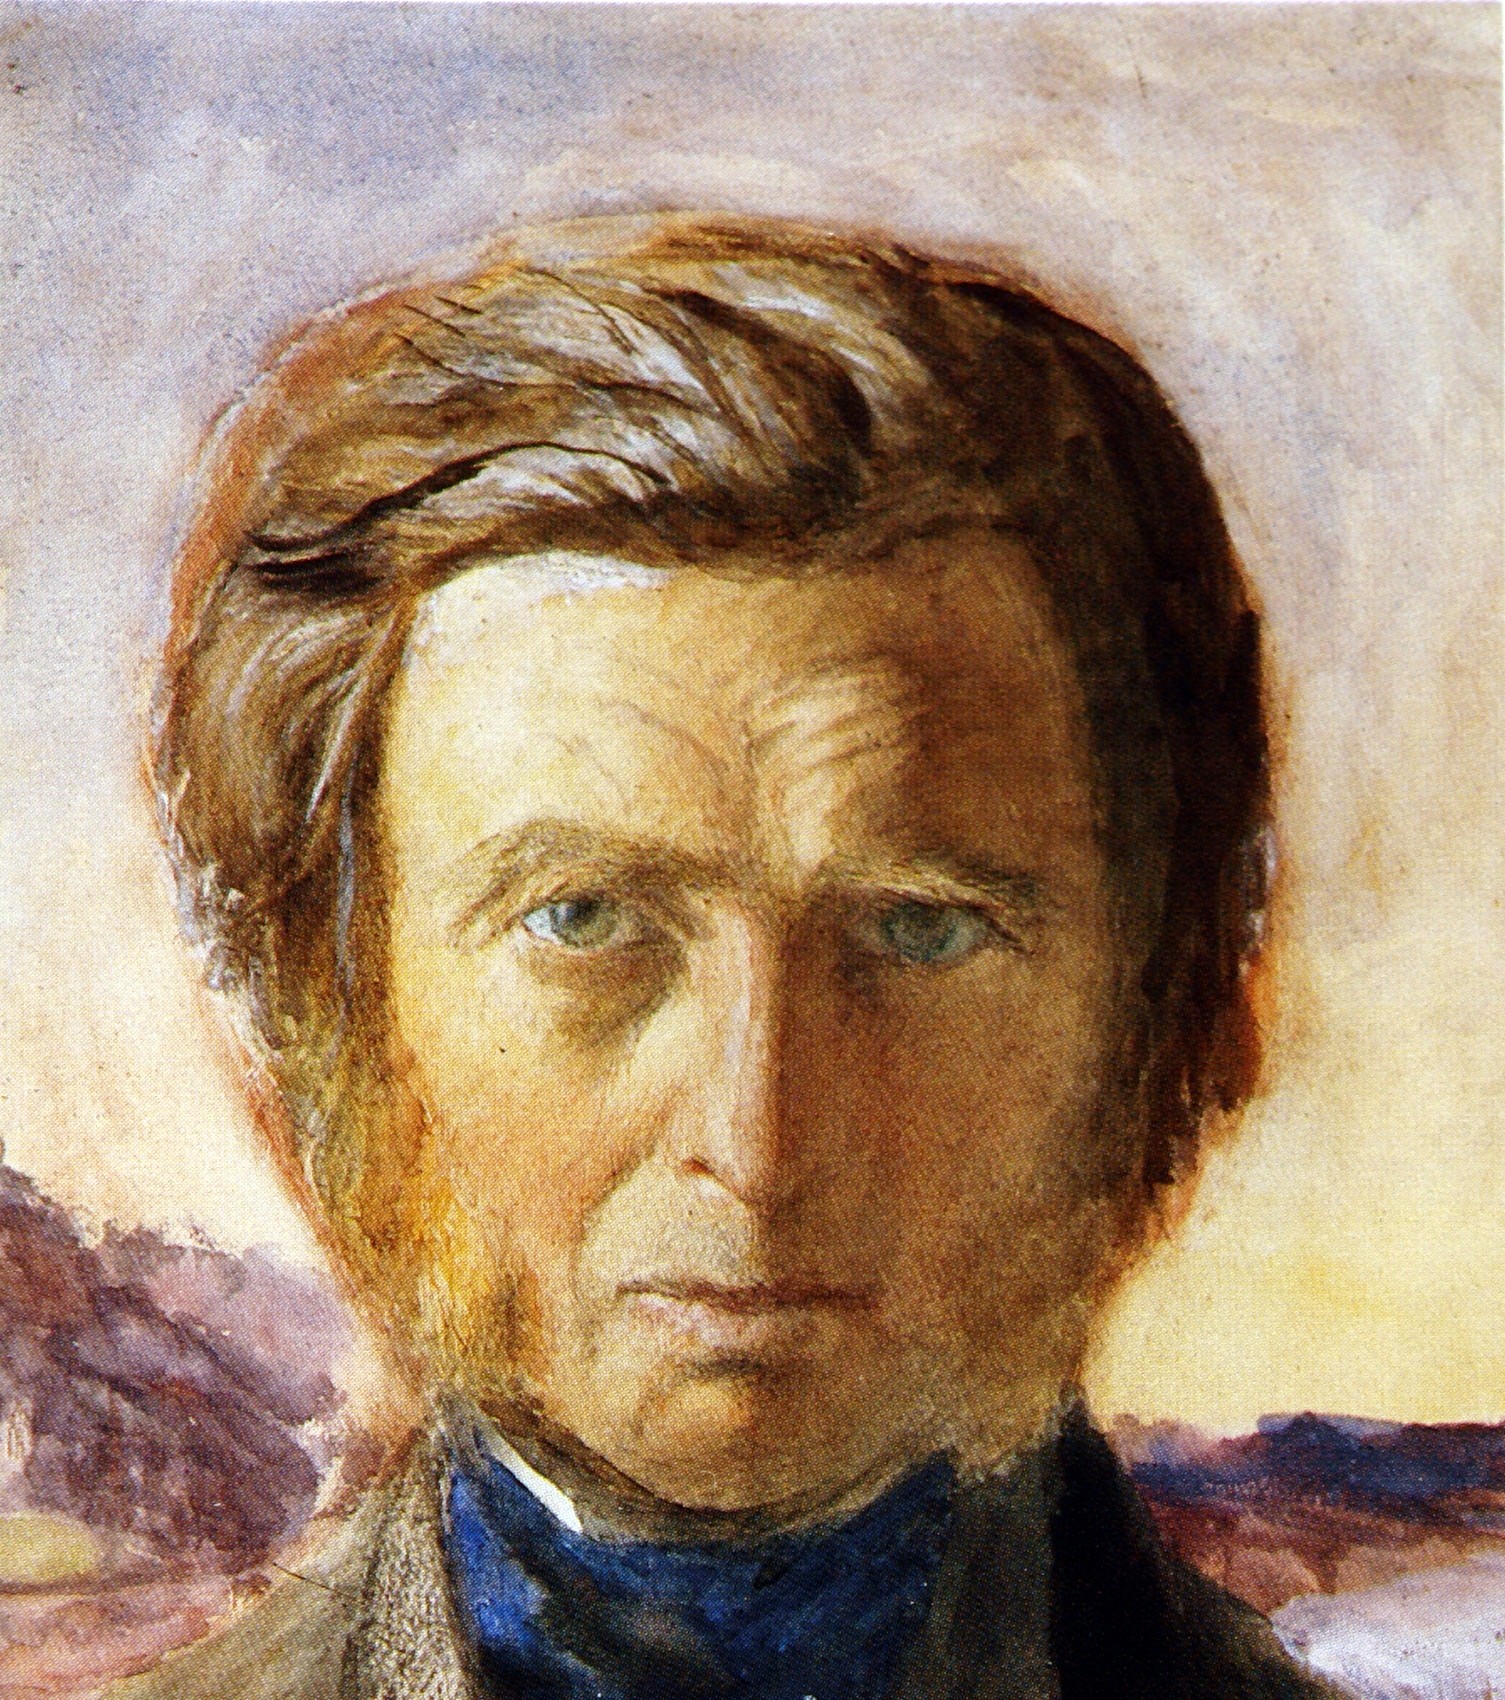 Ruskin according to Proust